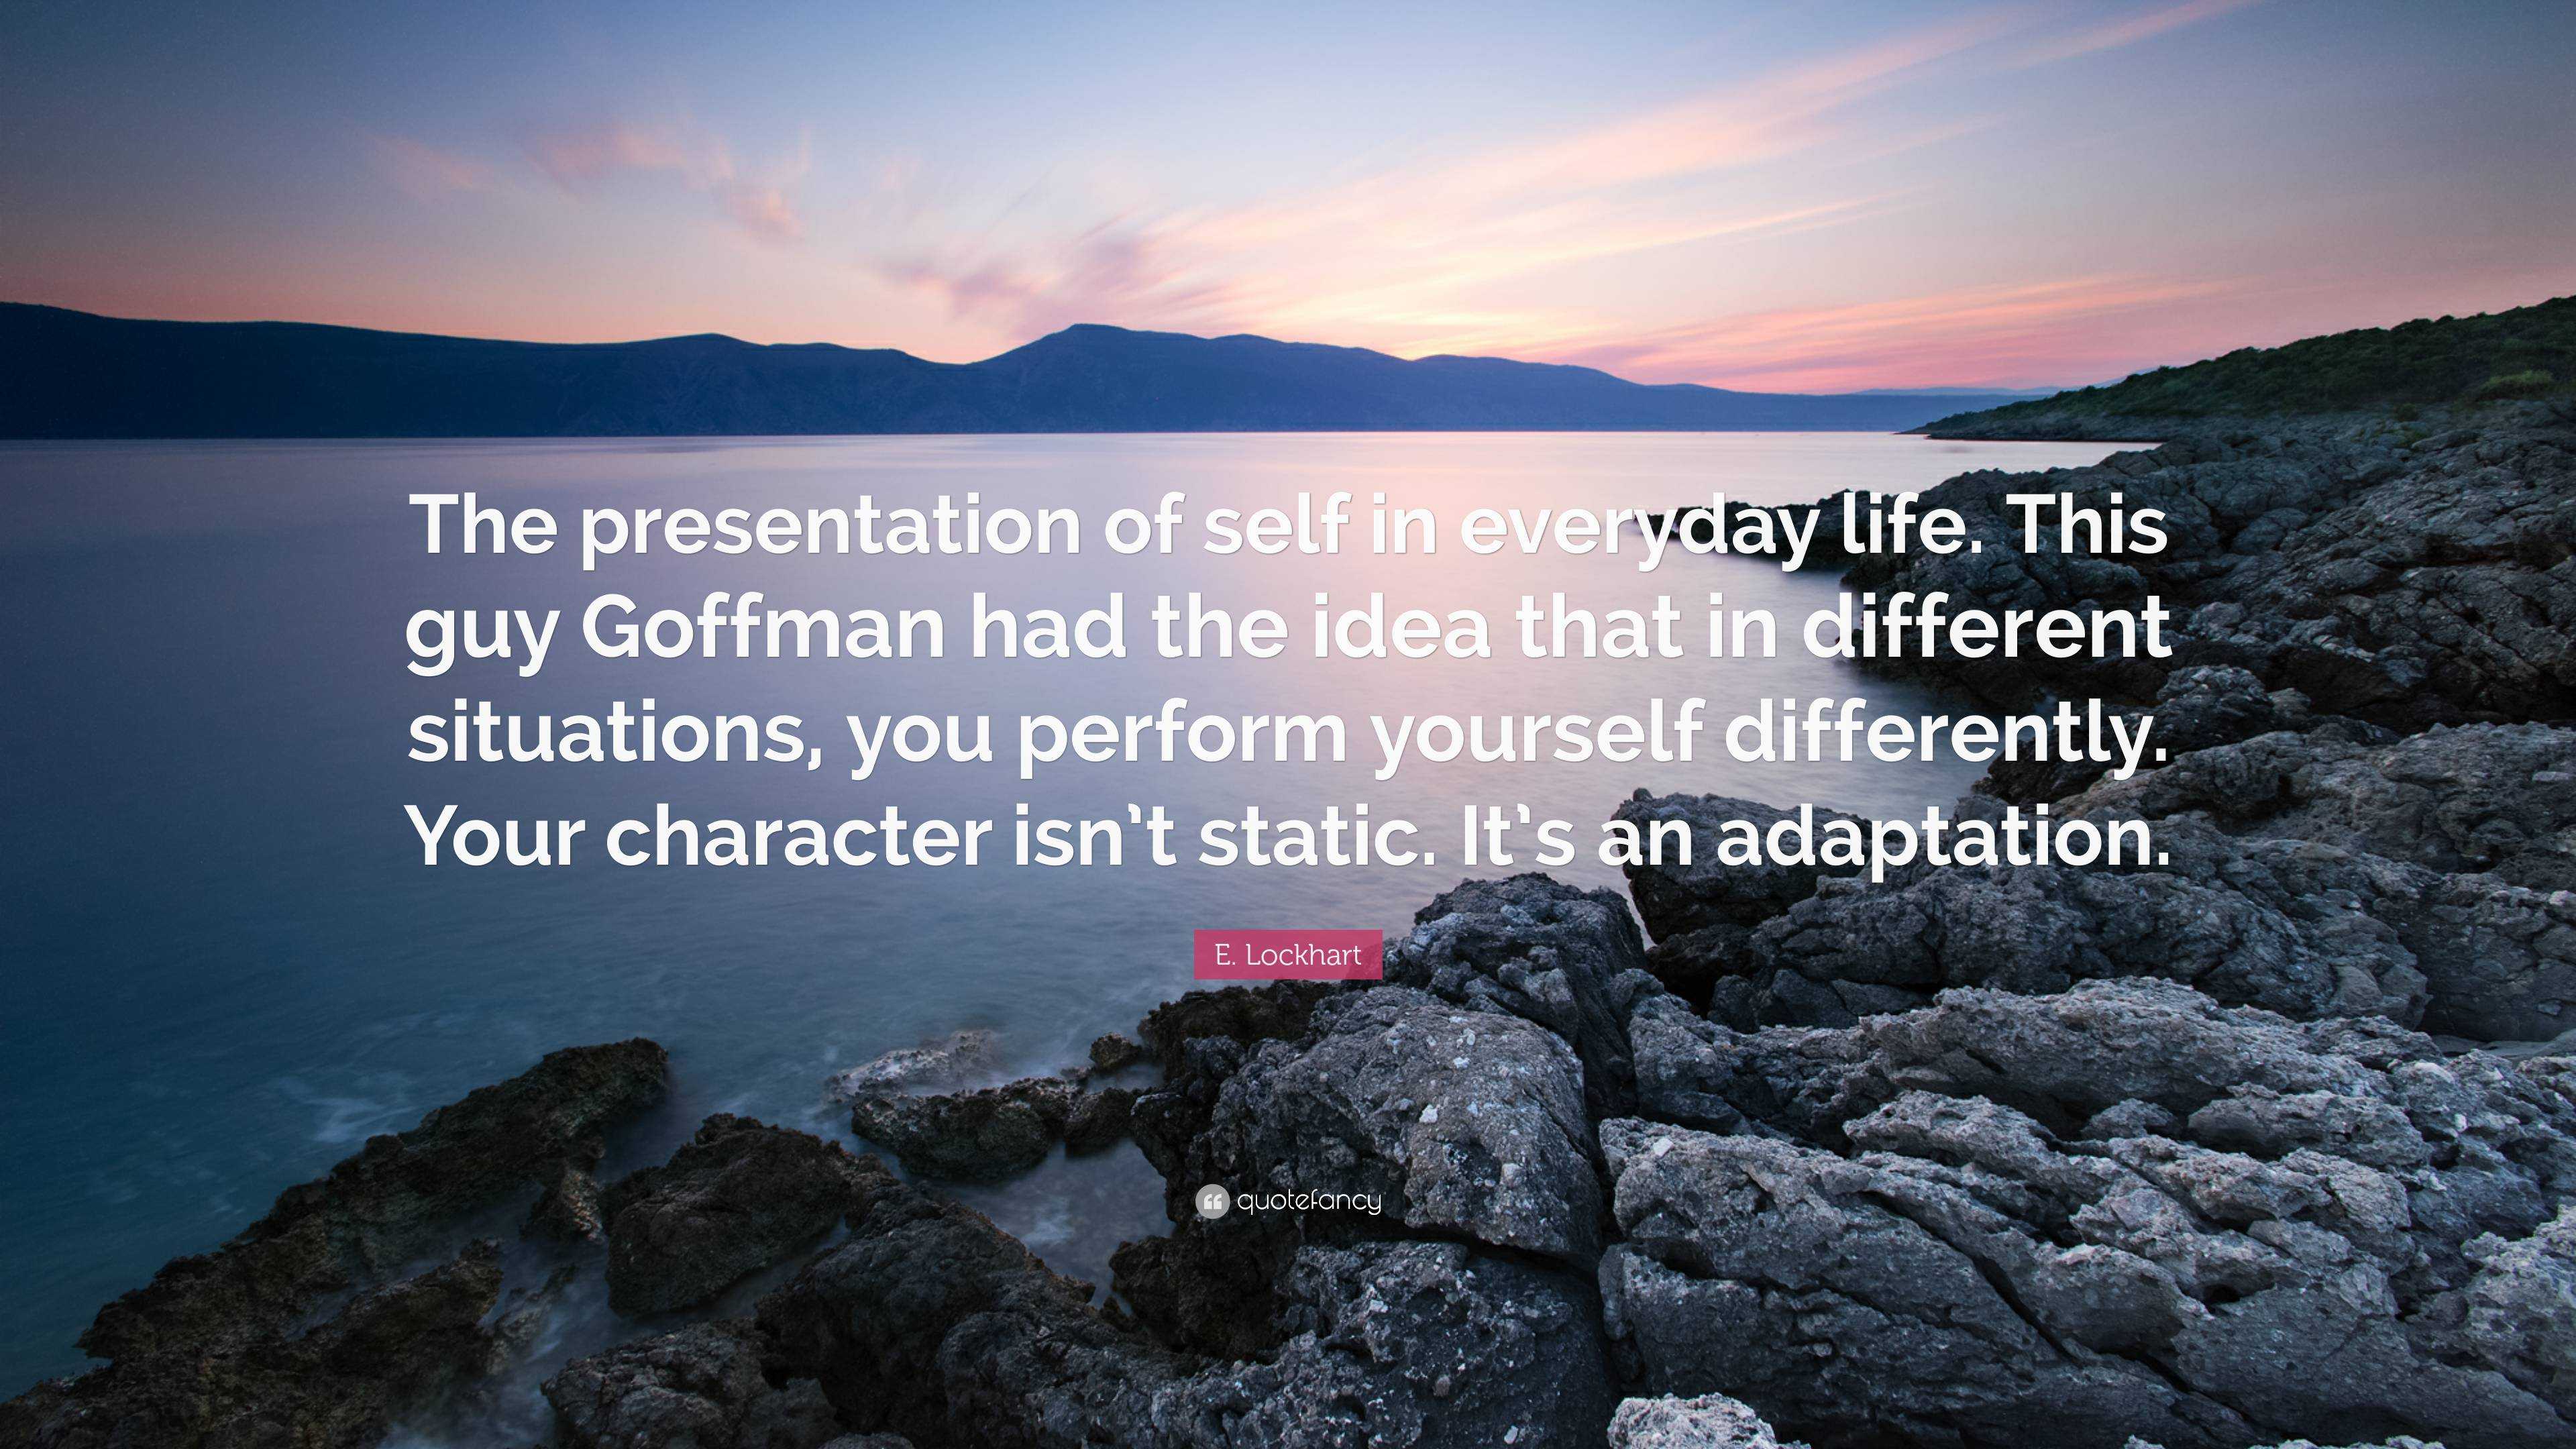 the presentation of self in everyday life citation